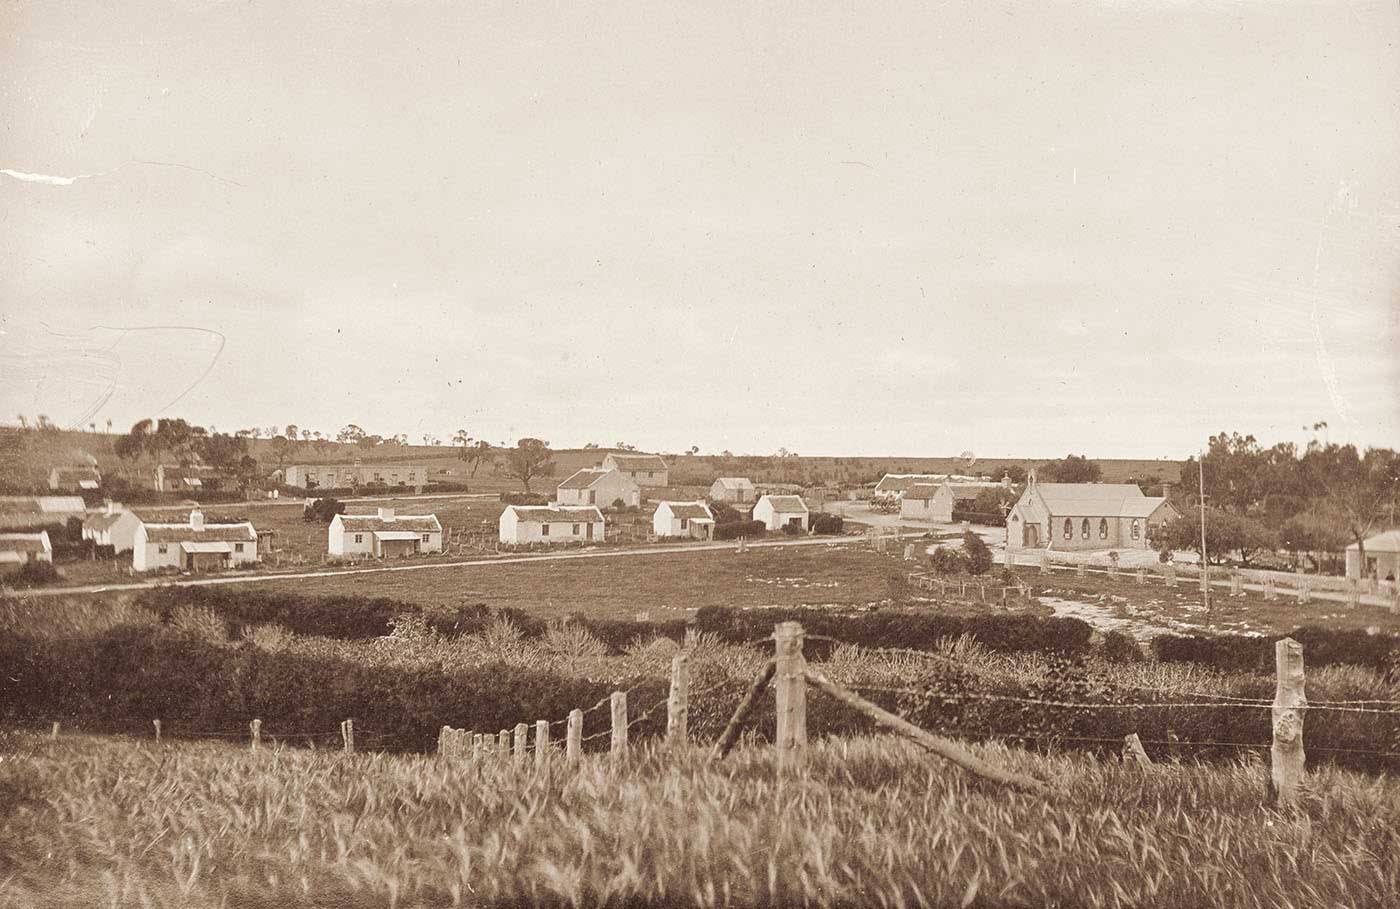 Black and white photo of rural landscape with homesteads in the distance.